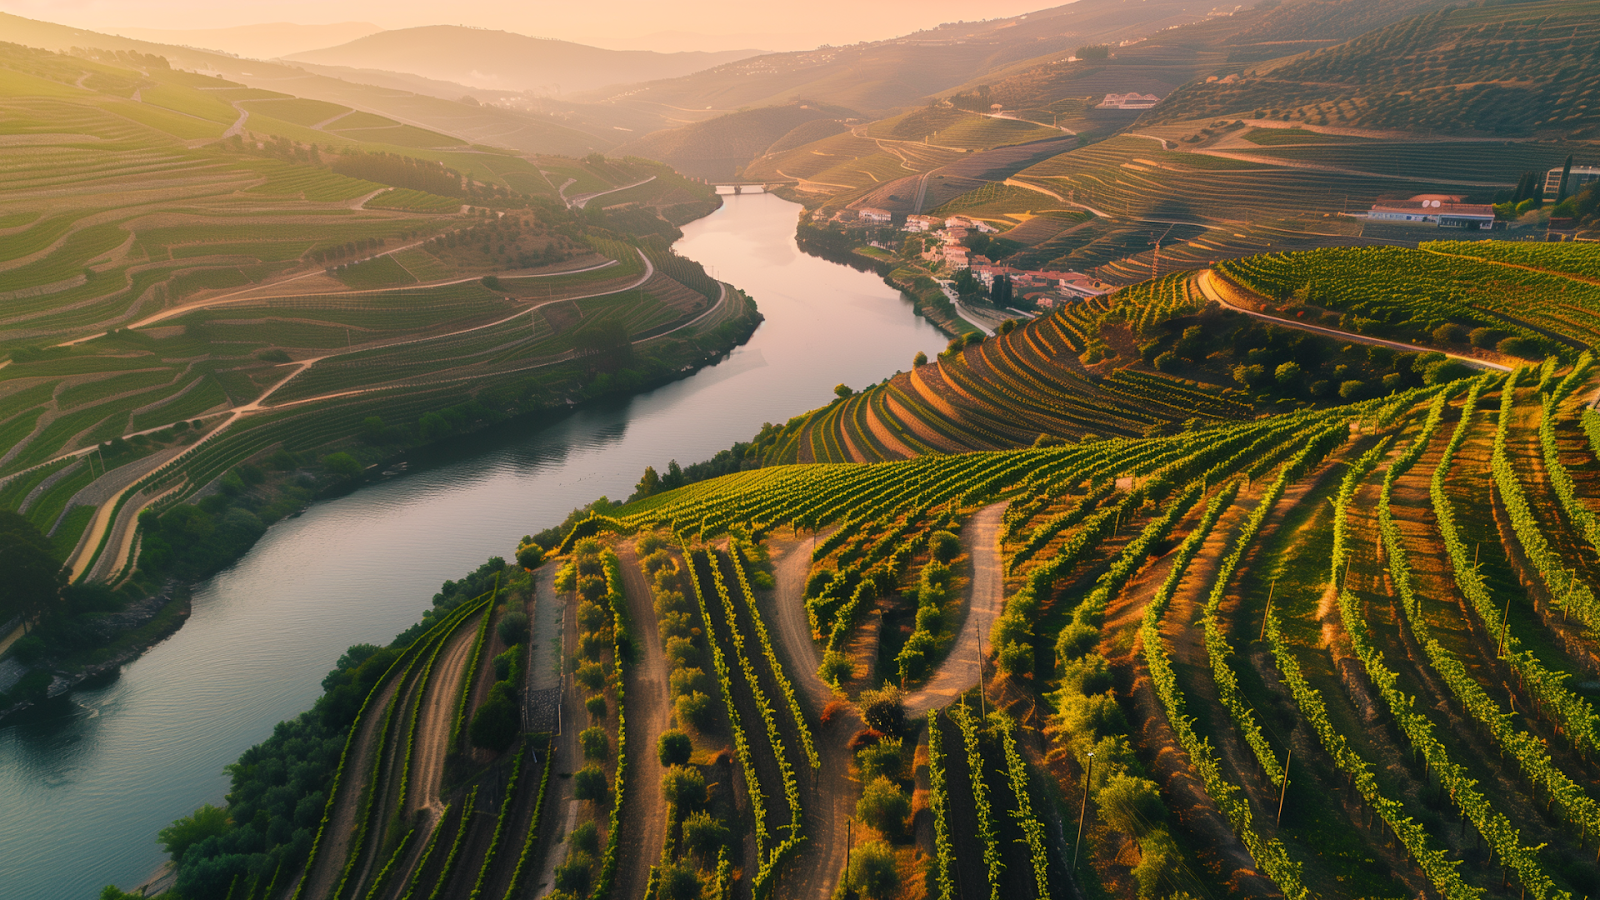 Drone view of Douro Valley during harvest with terraced vineyards and the river winding through.